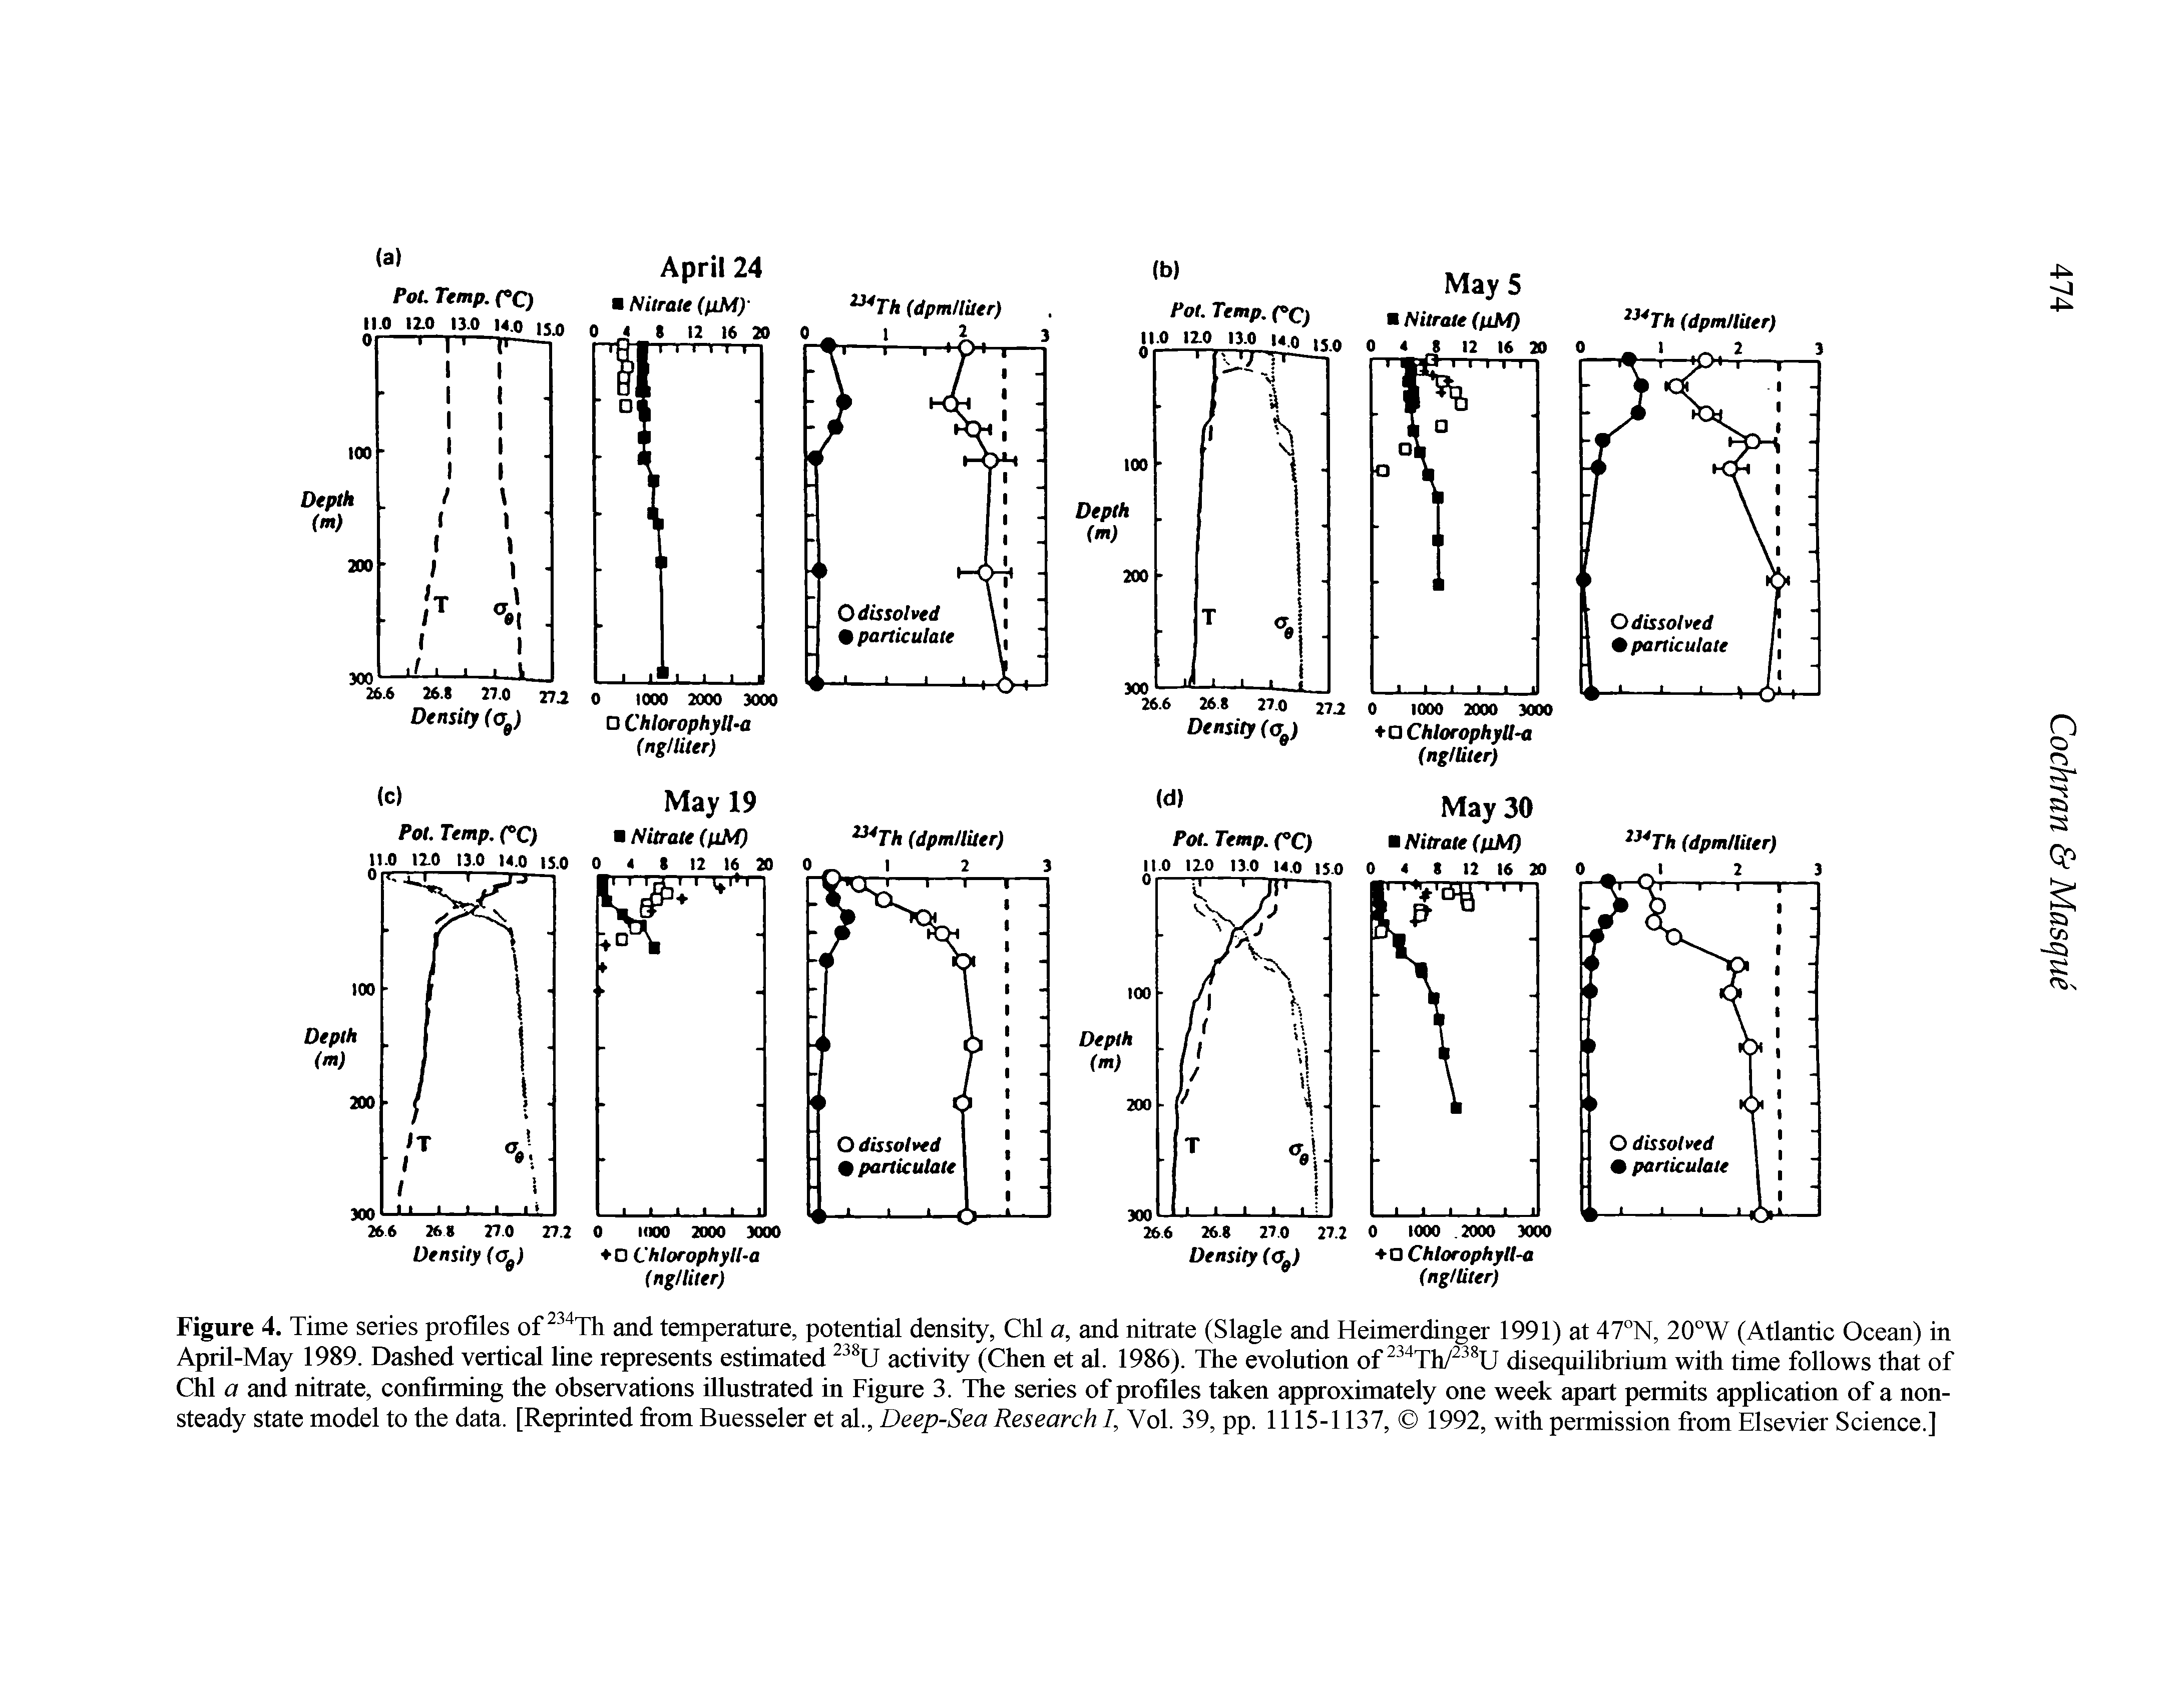 Figure 4. Time series profiles of and temperature, potential density, Chi a, and nitrate (Slagle and Heimerdinger 1991) at 47°N, 20°W (Atlantic Ocean) in April-May 1989. Dashed vertical line represents estimated activity (Chen et al. 1986). The evolution of " Th/ U disequilibrium with time follows that of Chi a and nitrate, confirming the observations illustrated in Figure 3. The series of profiles taken approximately one week apart permits application of a nonsteady state model to the data. [Reprinted from Buesseler et al., Deep-Sea Research /, Vol. 39, pp. 1115-1137, 1992, with permission from Elsevier Science.]...